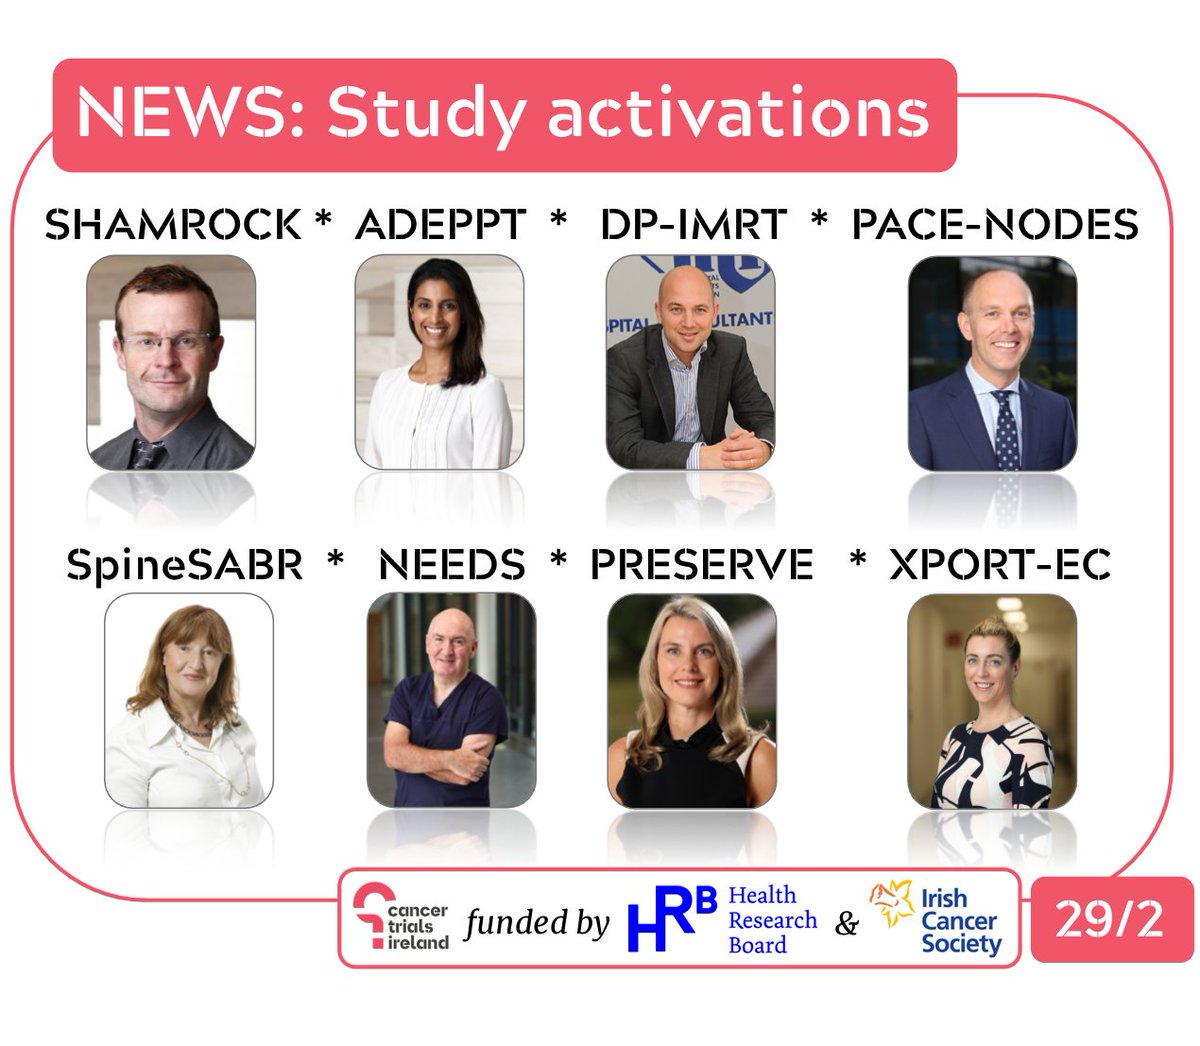 Huge 👏🙏 to site staff and @CancerTrials_ie staff who in the past 5 months have activated 8⃣ new studies across breast, lung, pancreatic, GI, CNS, GU, gynae & H&N. @DrJNaidoo @Dcollinsflynn @ClareFaul @DrSineadBrennan @PaulKRadiation @mcveyge @Seamusoreilly18 @AngelaClaytonL1